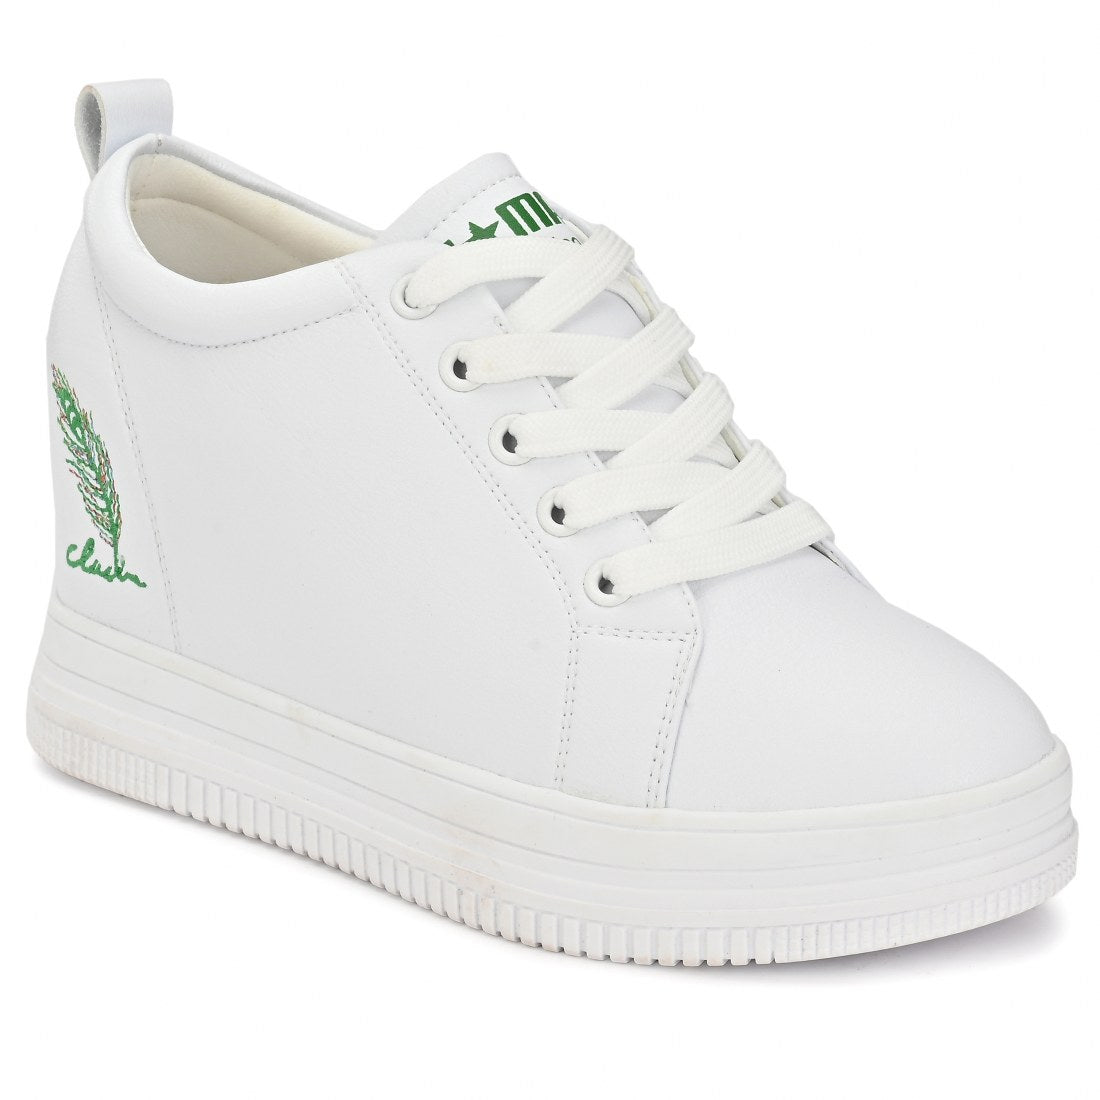 W-DIMP-1019 WOMEN LEATHERITE WHITE CASUAL LACE UP SNEAKERS